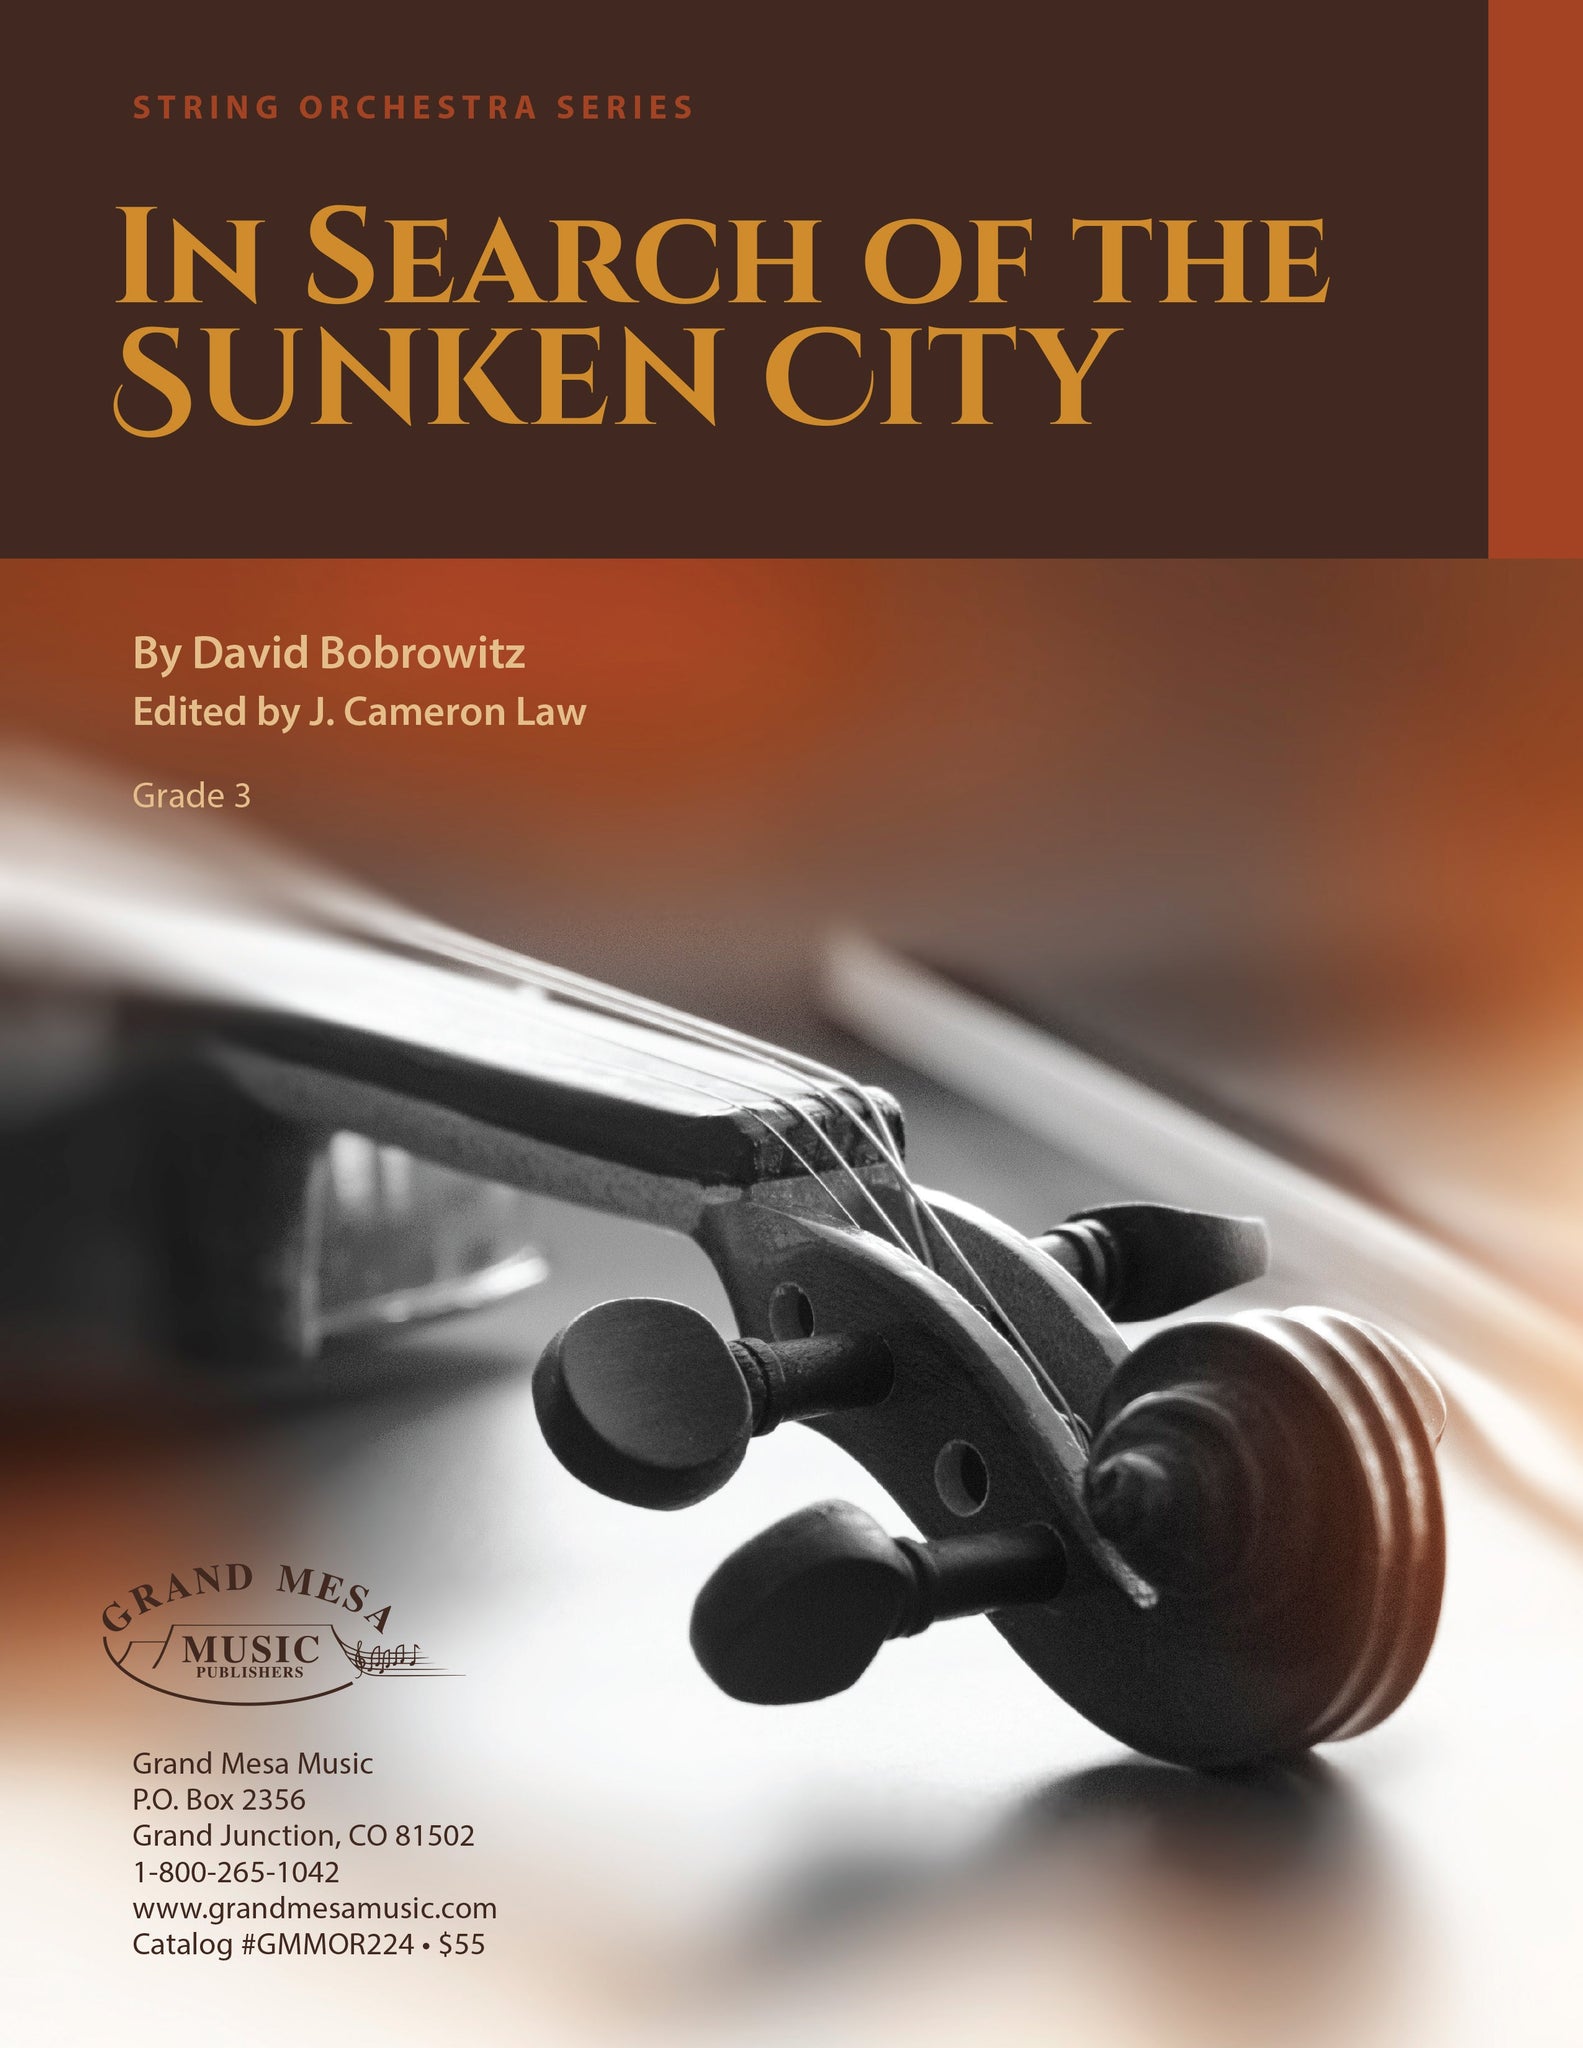 Strings sheet music cover of In Search of the Sunken City, composed by David Bobrowitz.